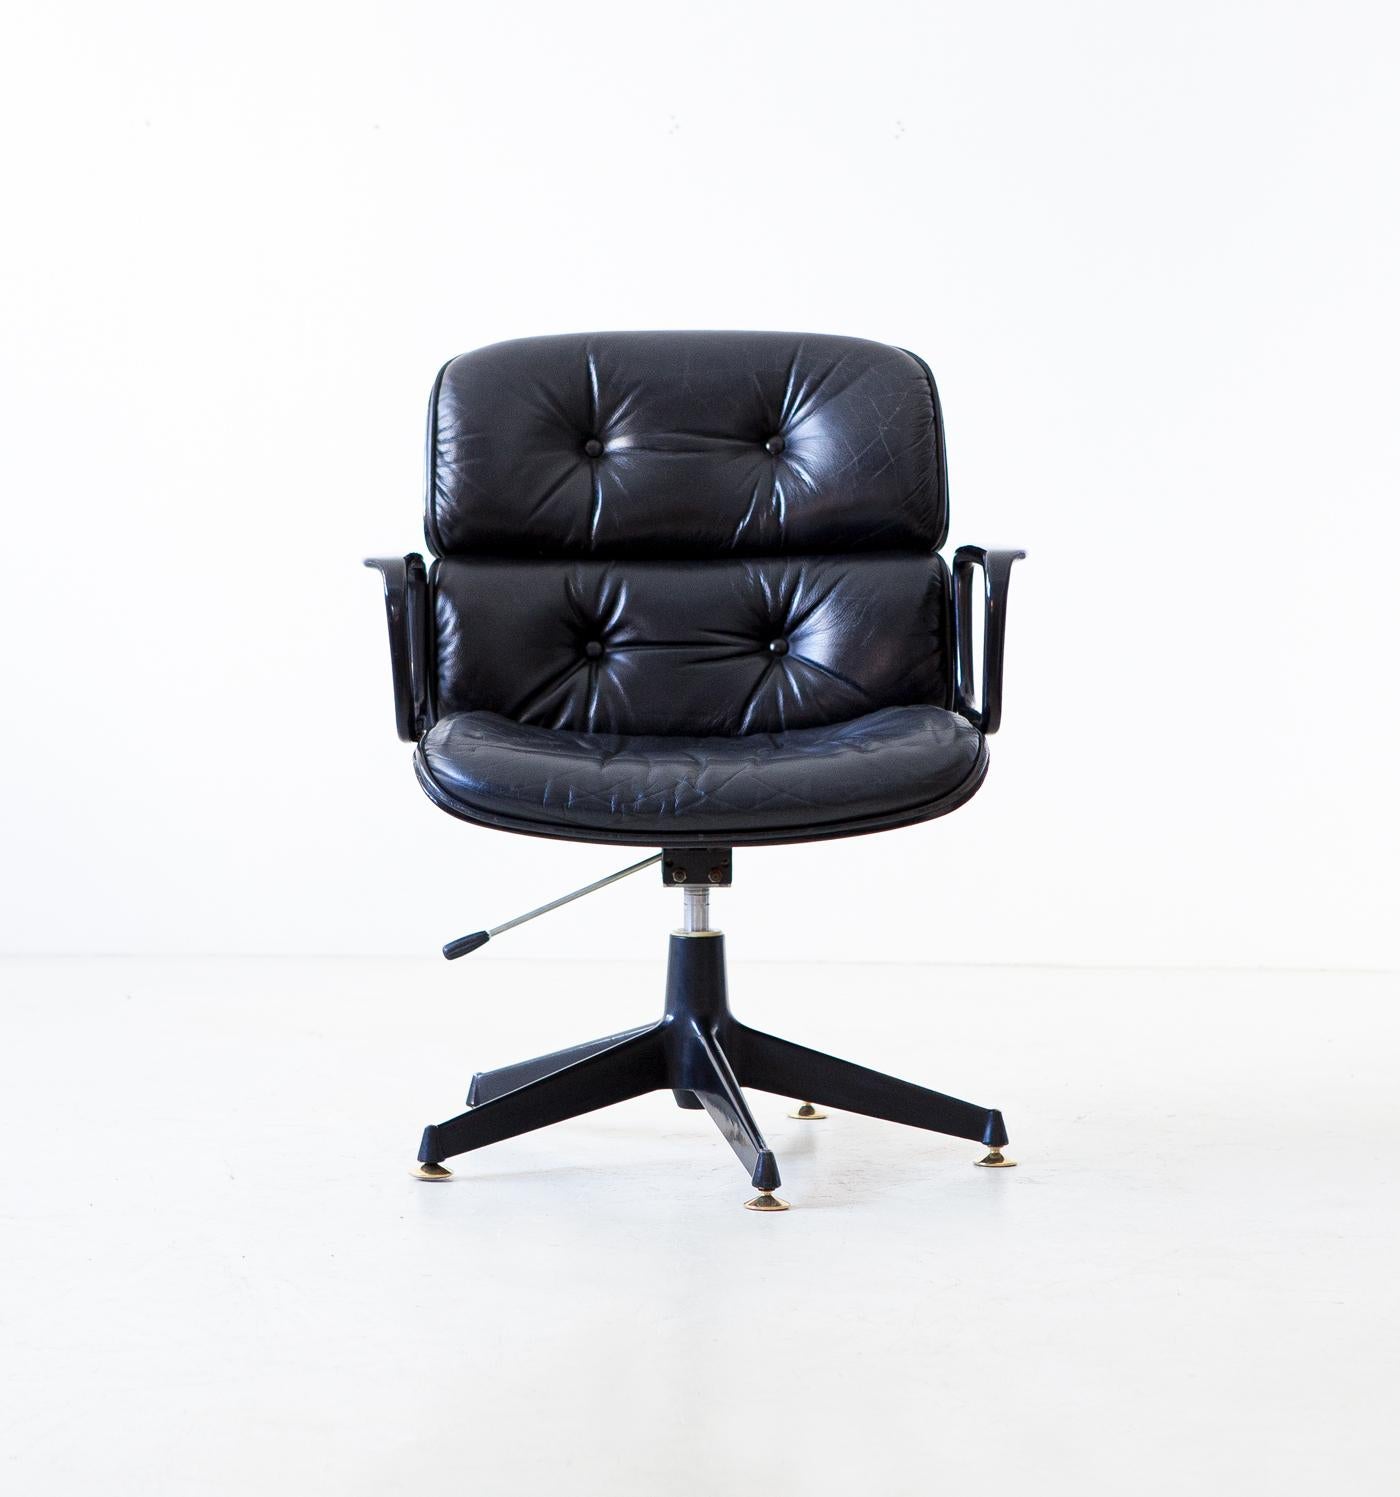 Office swivel armchair designed by Ico Parisi and produced by M.I.M. (Mobili Italiani Moderni) Roma, Italy

This is the  executive model with double back from of the 1960s.

Fully restored curved wooden frame with a new shellac finishing, new black